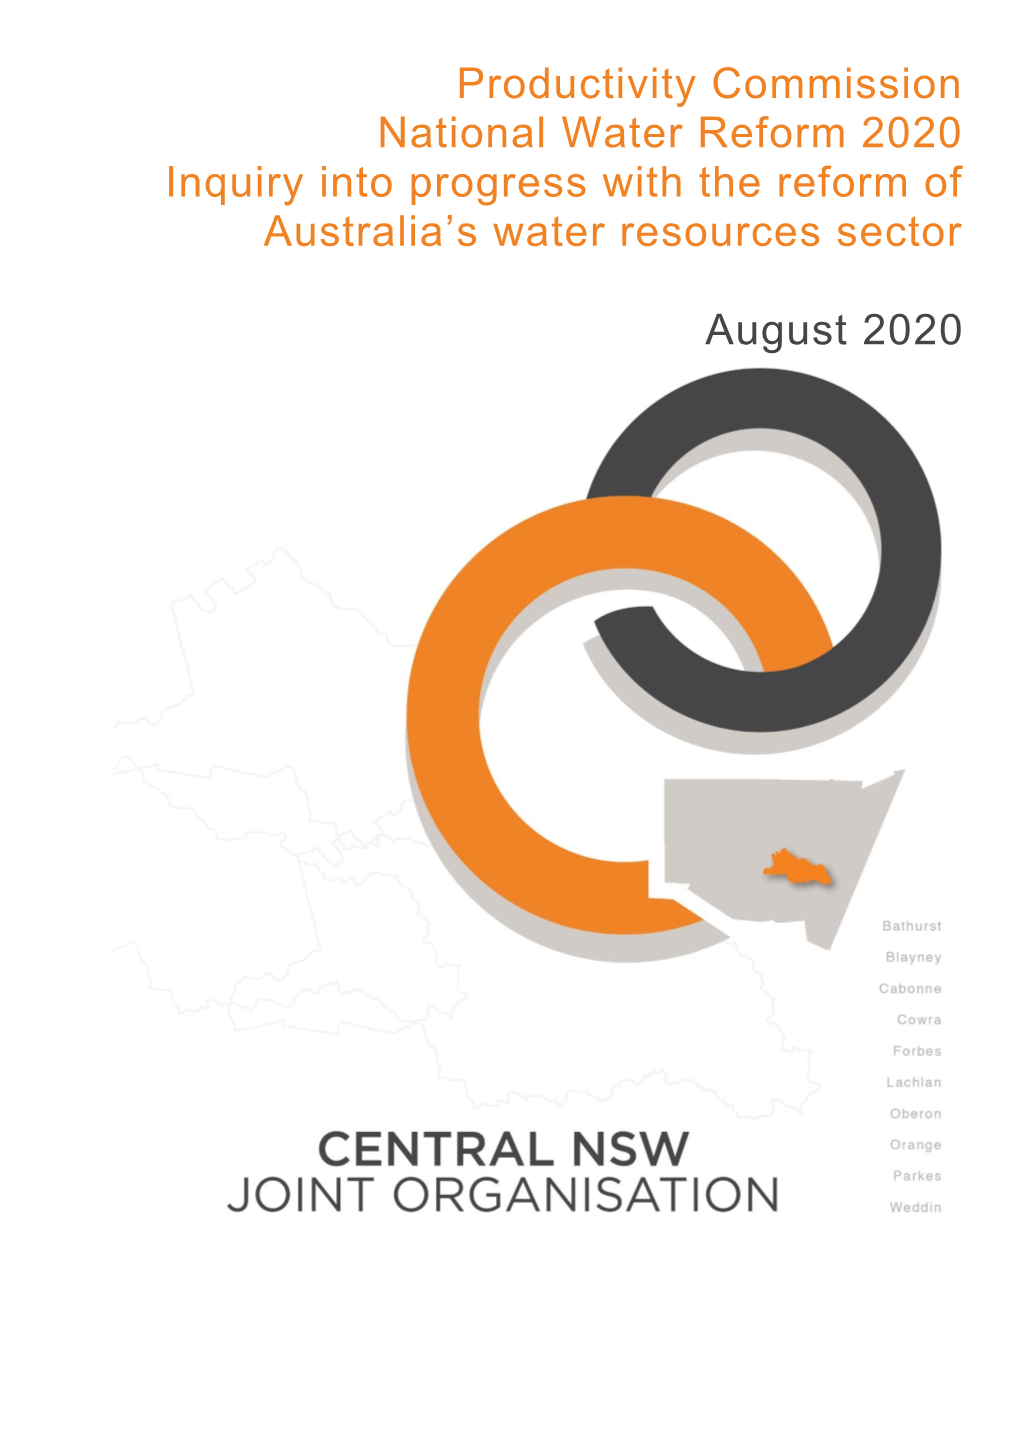 Central NSW Joint Organisation (CNSWJO)